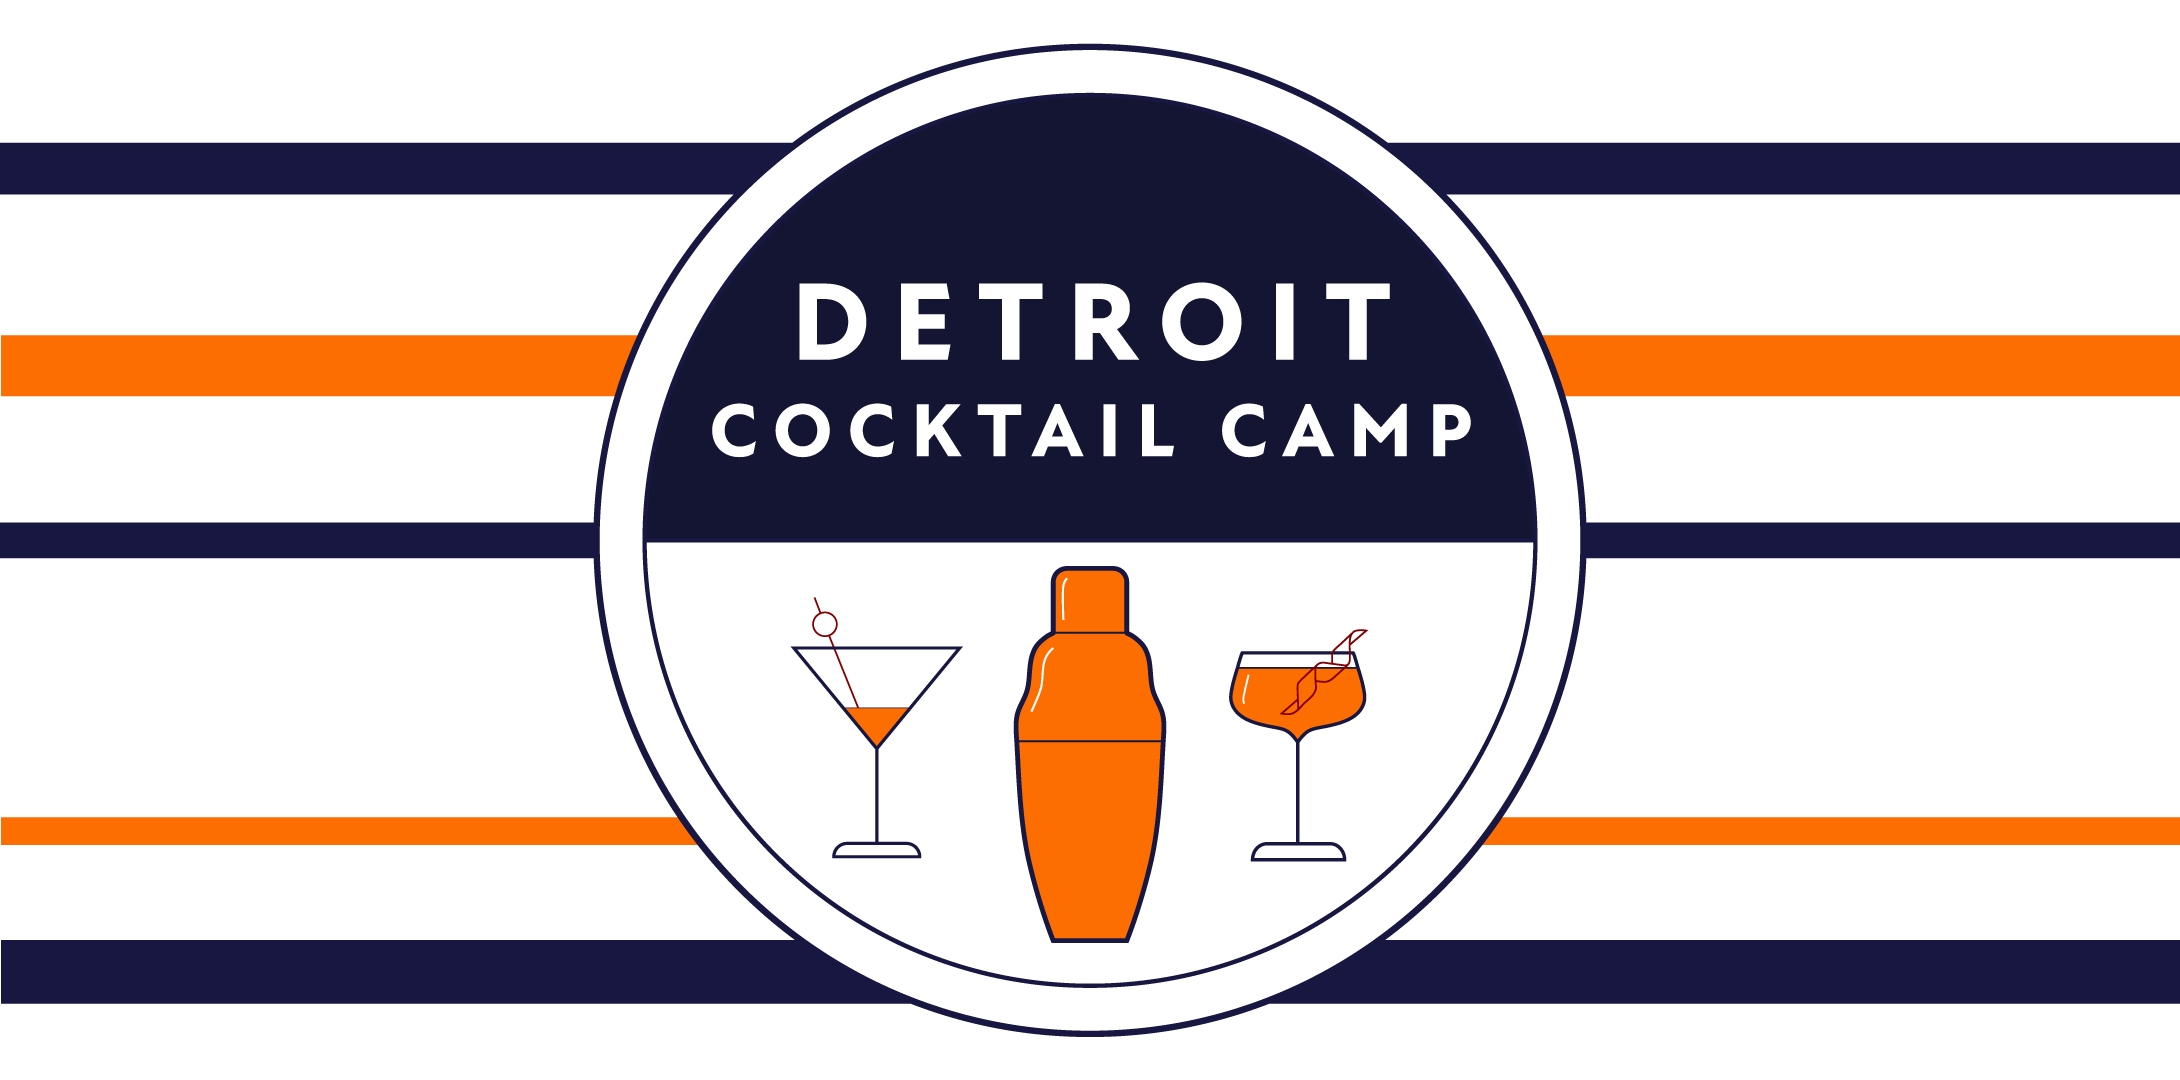 Detroit Cocktail Camp - Whiskey: From Grain to Glass